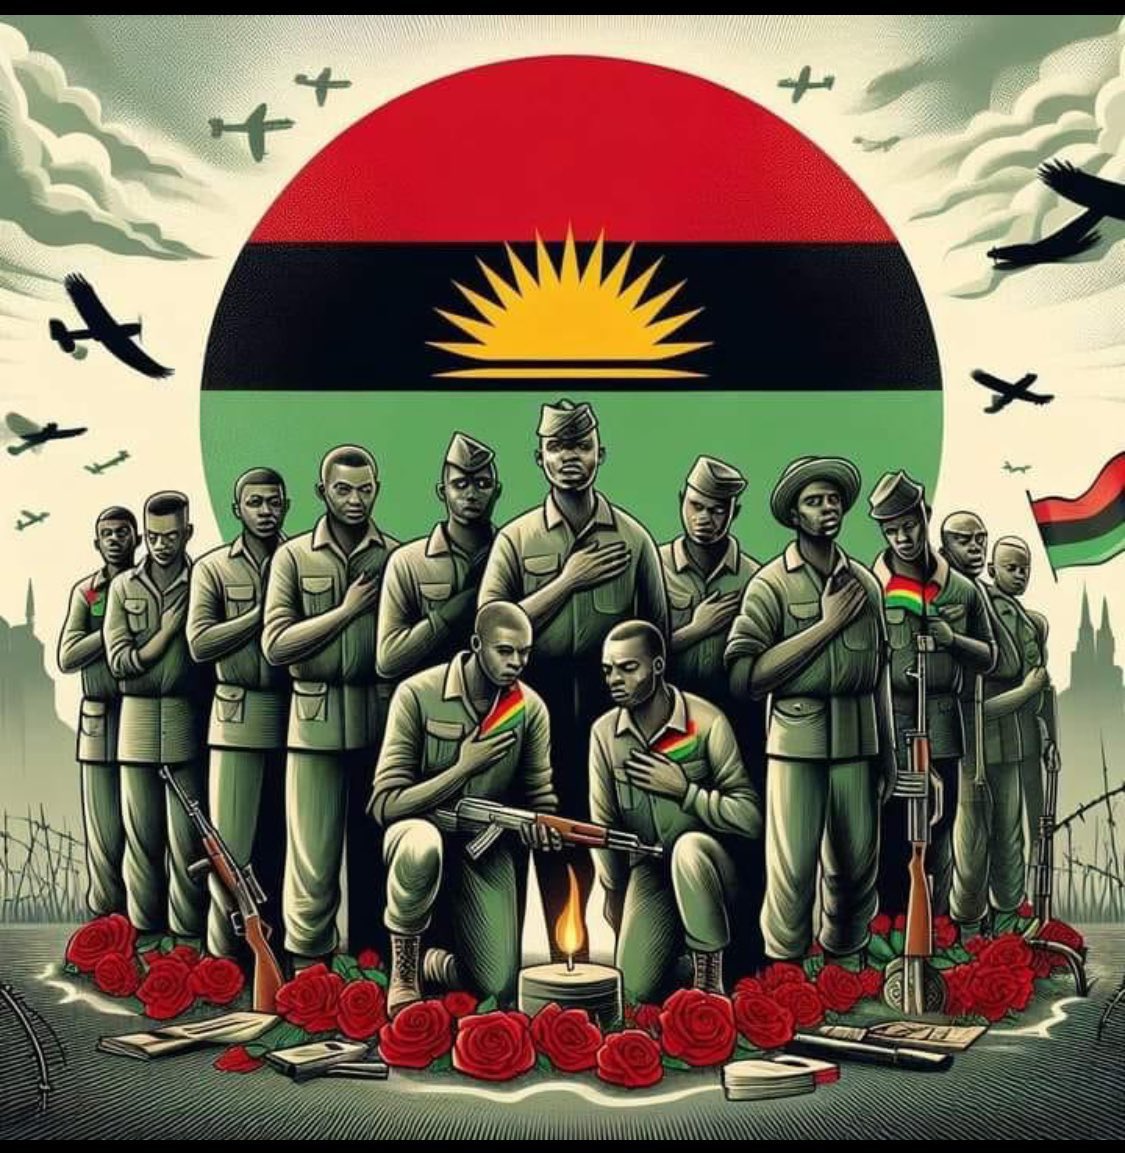 Today we celebrate the fallen heroes of BIAFRA NATION. We acknowledge your efforts in making sure we have a safe and egalitarian society. You fought a right course and up till today your generation still uphold your legacy. All hail BIAFRA ODUDUWA REPUBLIC NOW/BIAFRA NOW